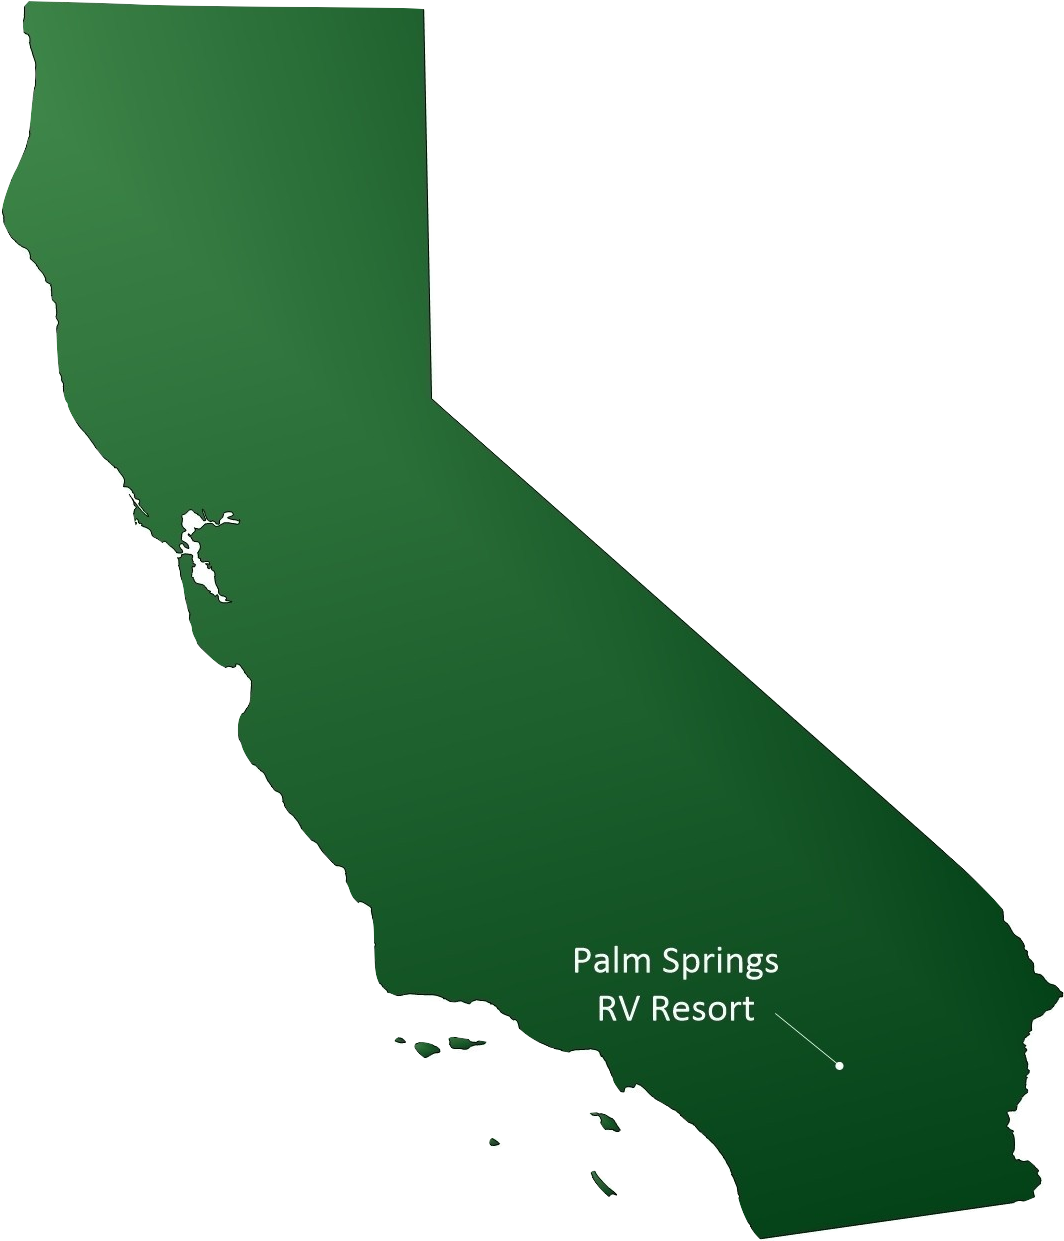 Palm Springs on the map burned